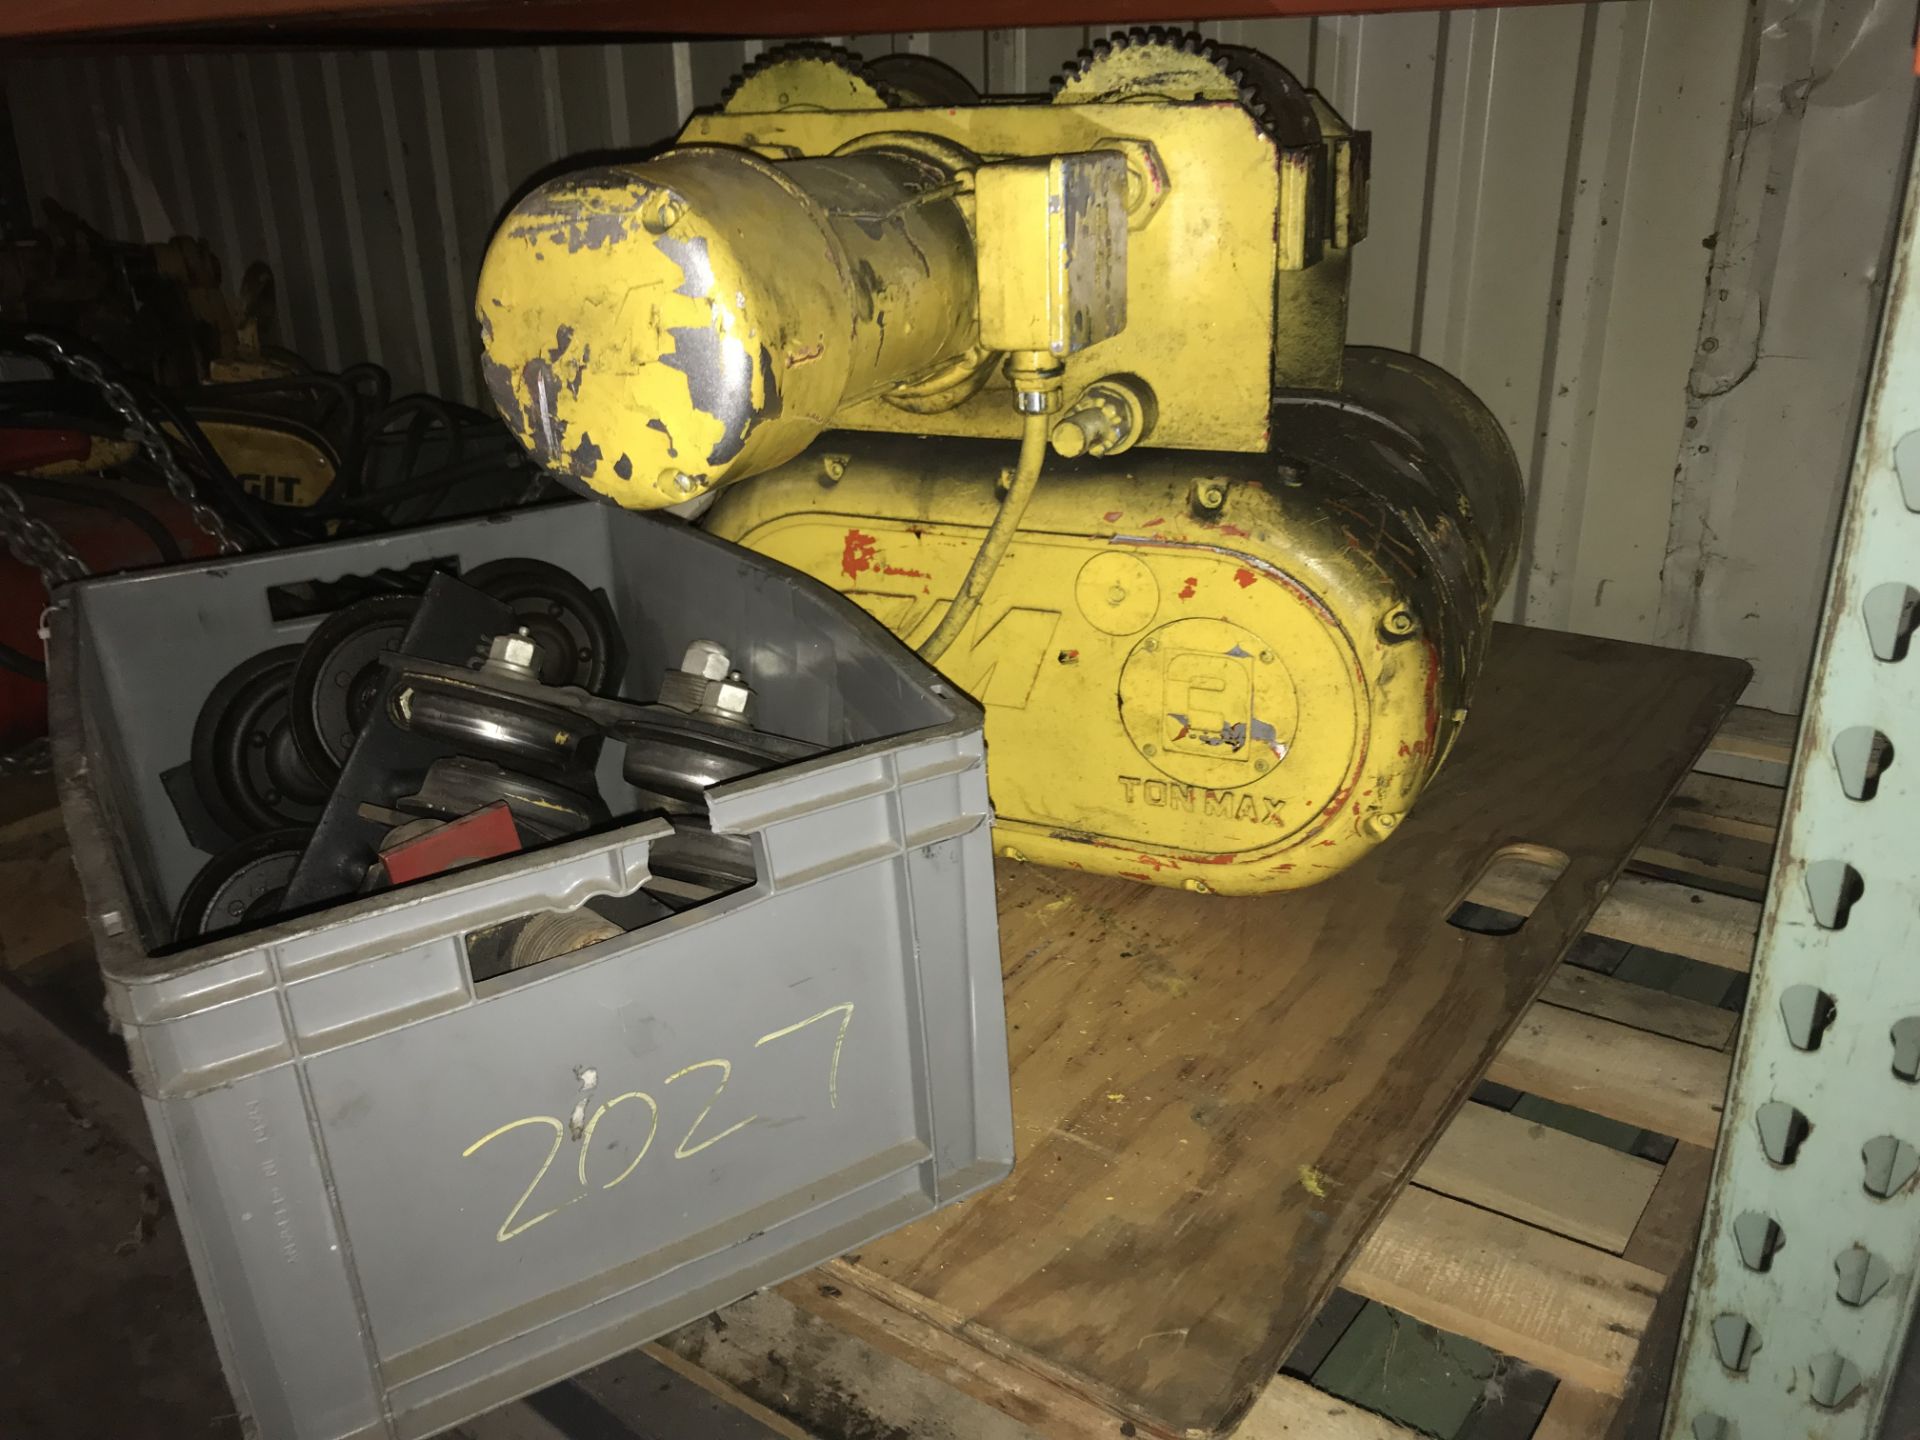 CM 3 Ton Hoist, Model# 7016, 7.5 HP, 460 Volts, 3 Phase, 60 Hz, Rigging Fee For This Item Is $30